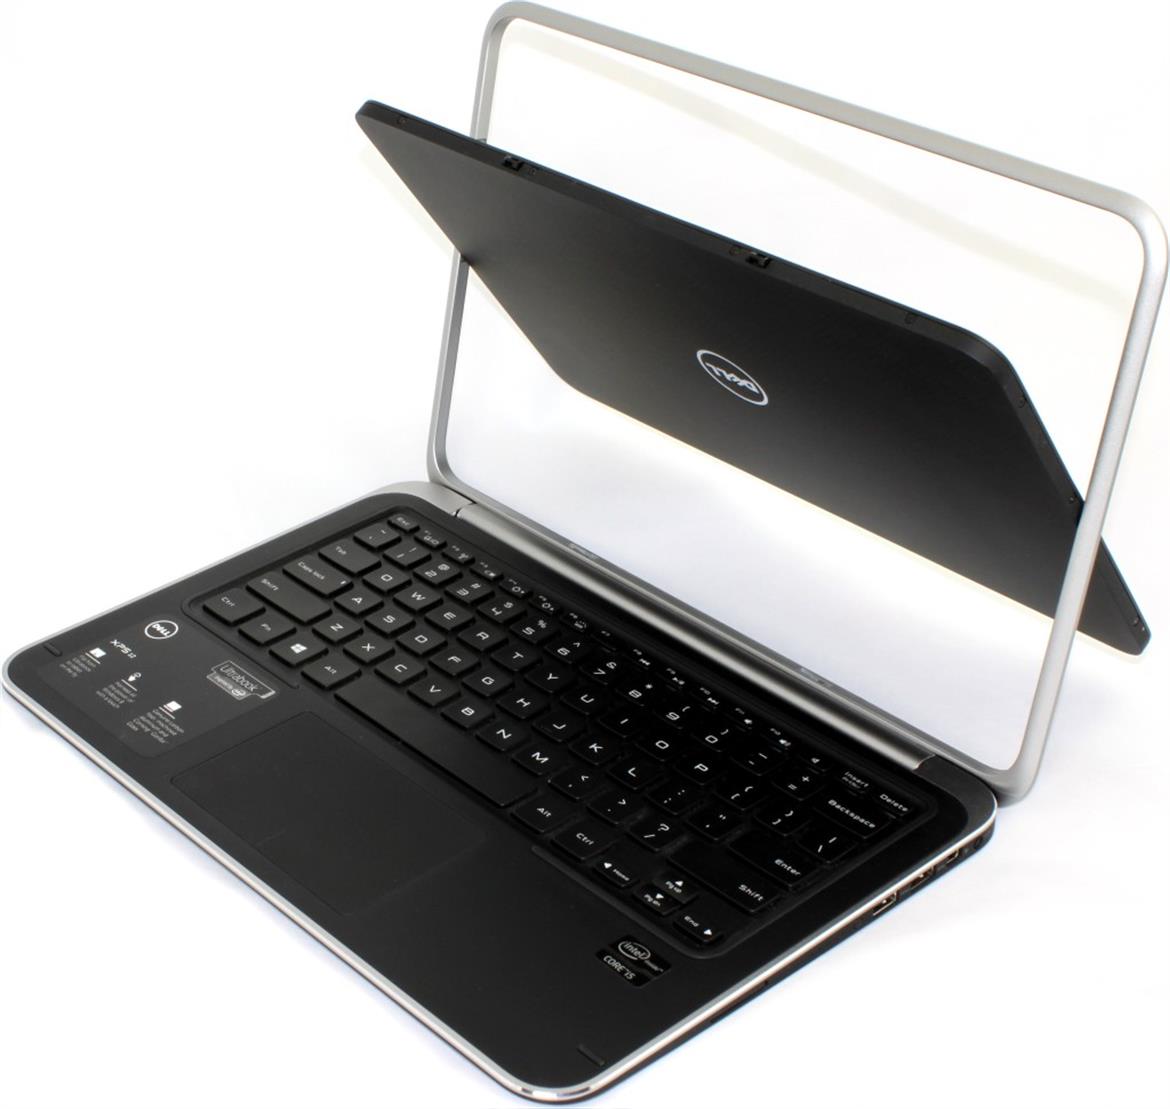 Dell XPS 12 Convertible Ultrabook Review